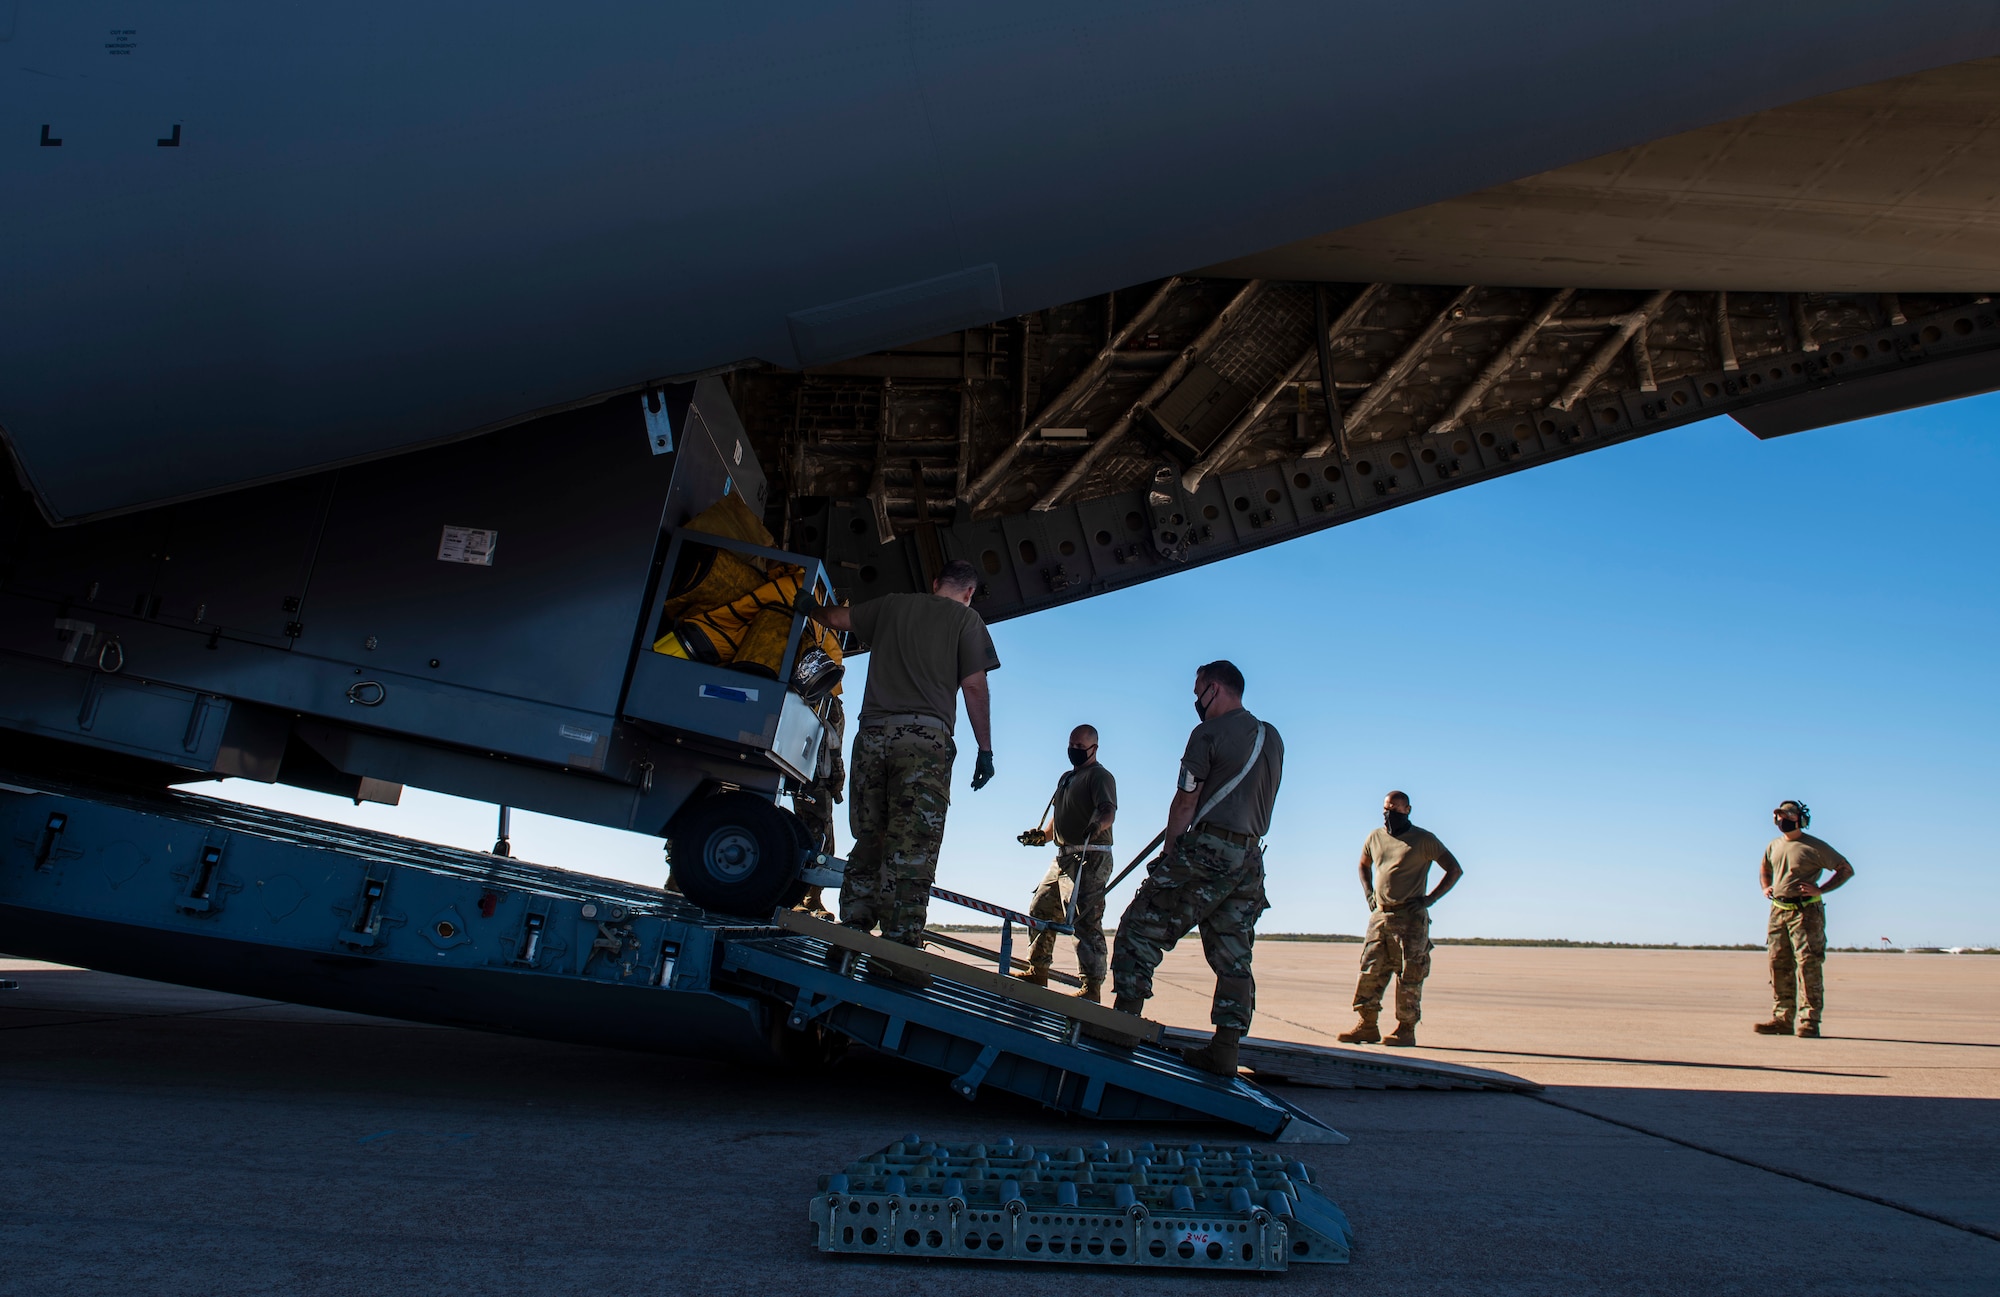 Airmen assigned to the 7th Logistics Readiness Squadron air transportation function unload cargo from a C-17 Globemaster III at Dyess Air Force Base, Texas, Nov. 25, 2020.